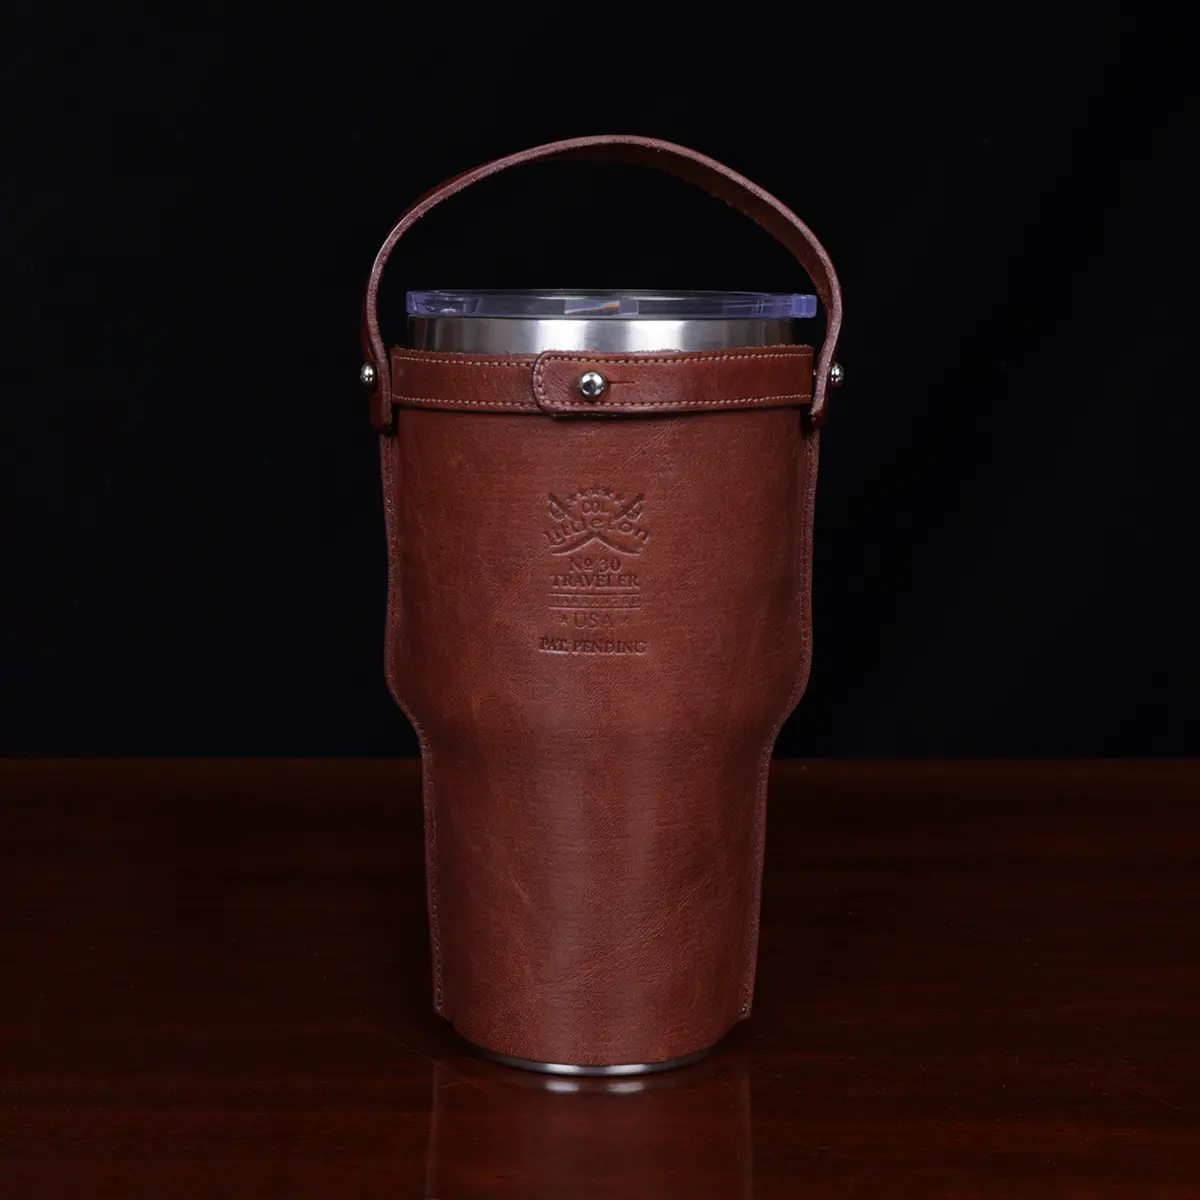 The back side of the No 30 Leather Tumbler